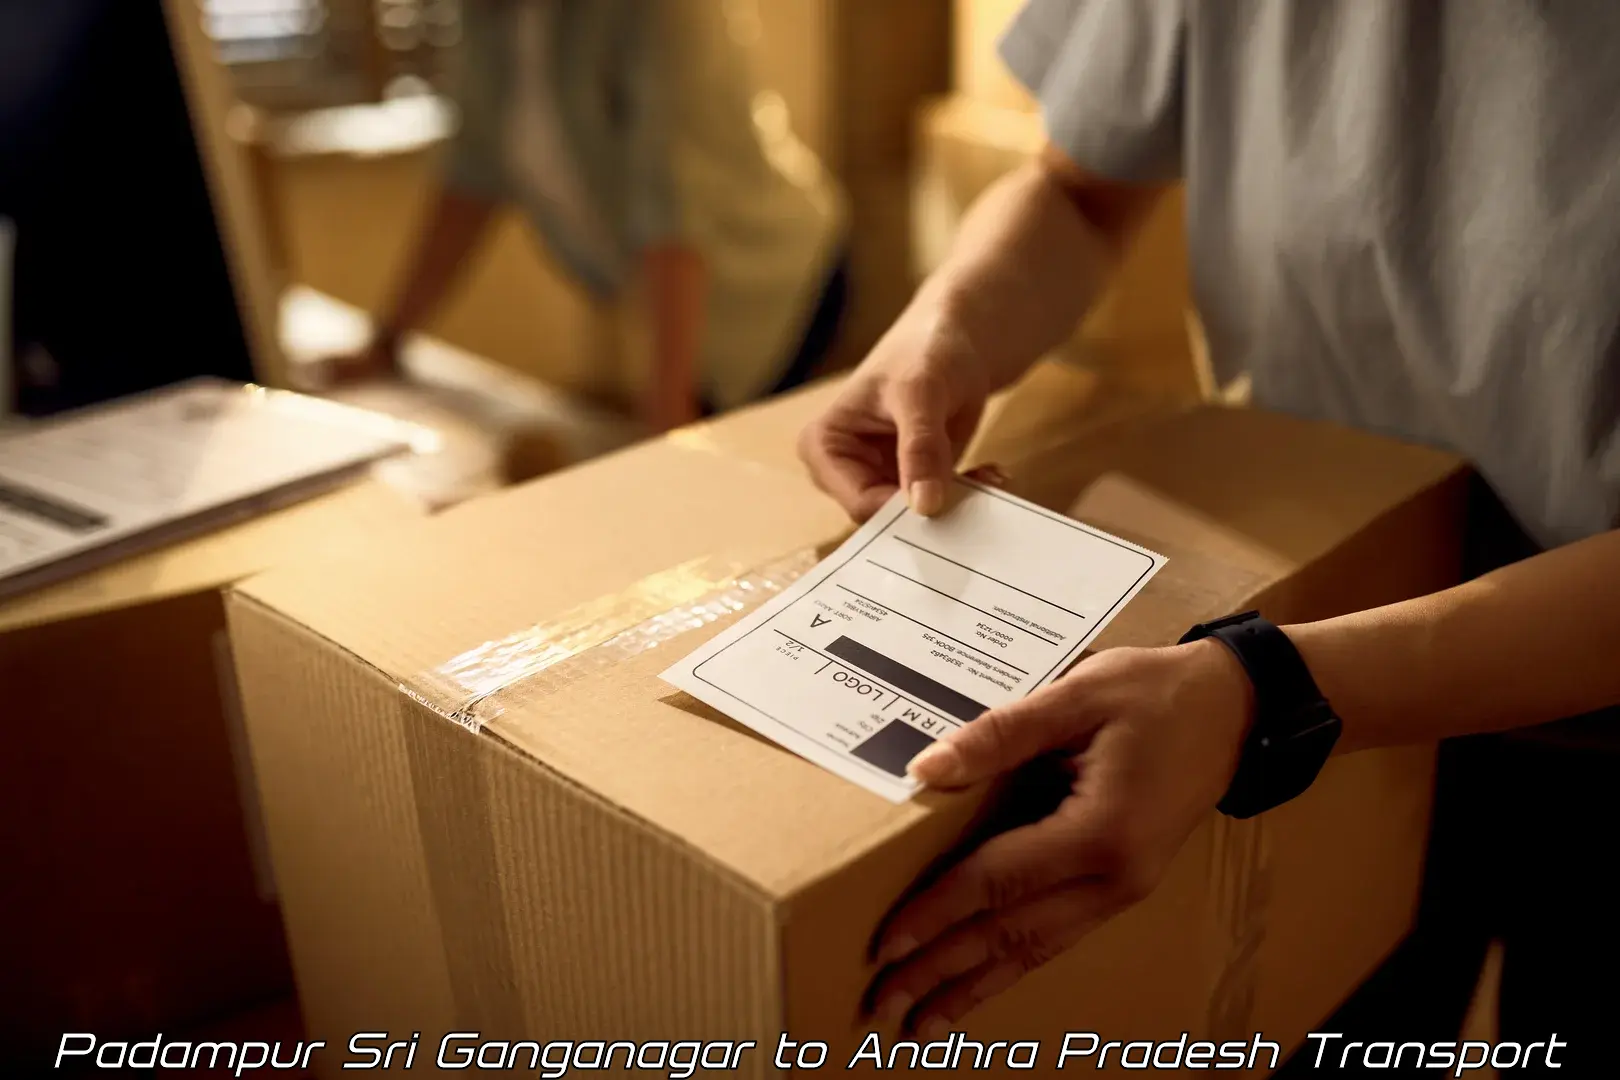 Package delivery services Padampur Sri Ganganagar to Tadipatri